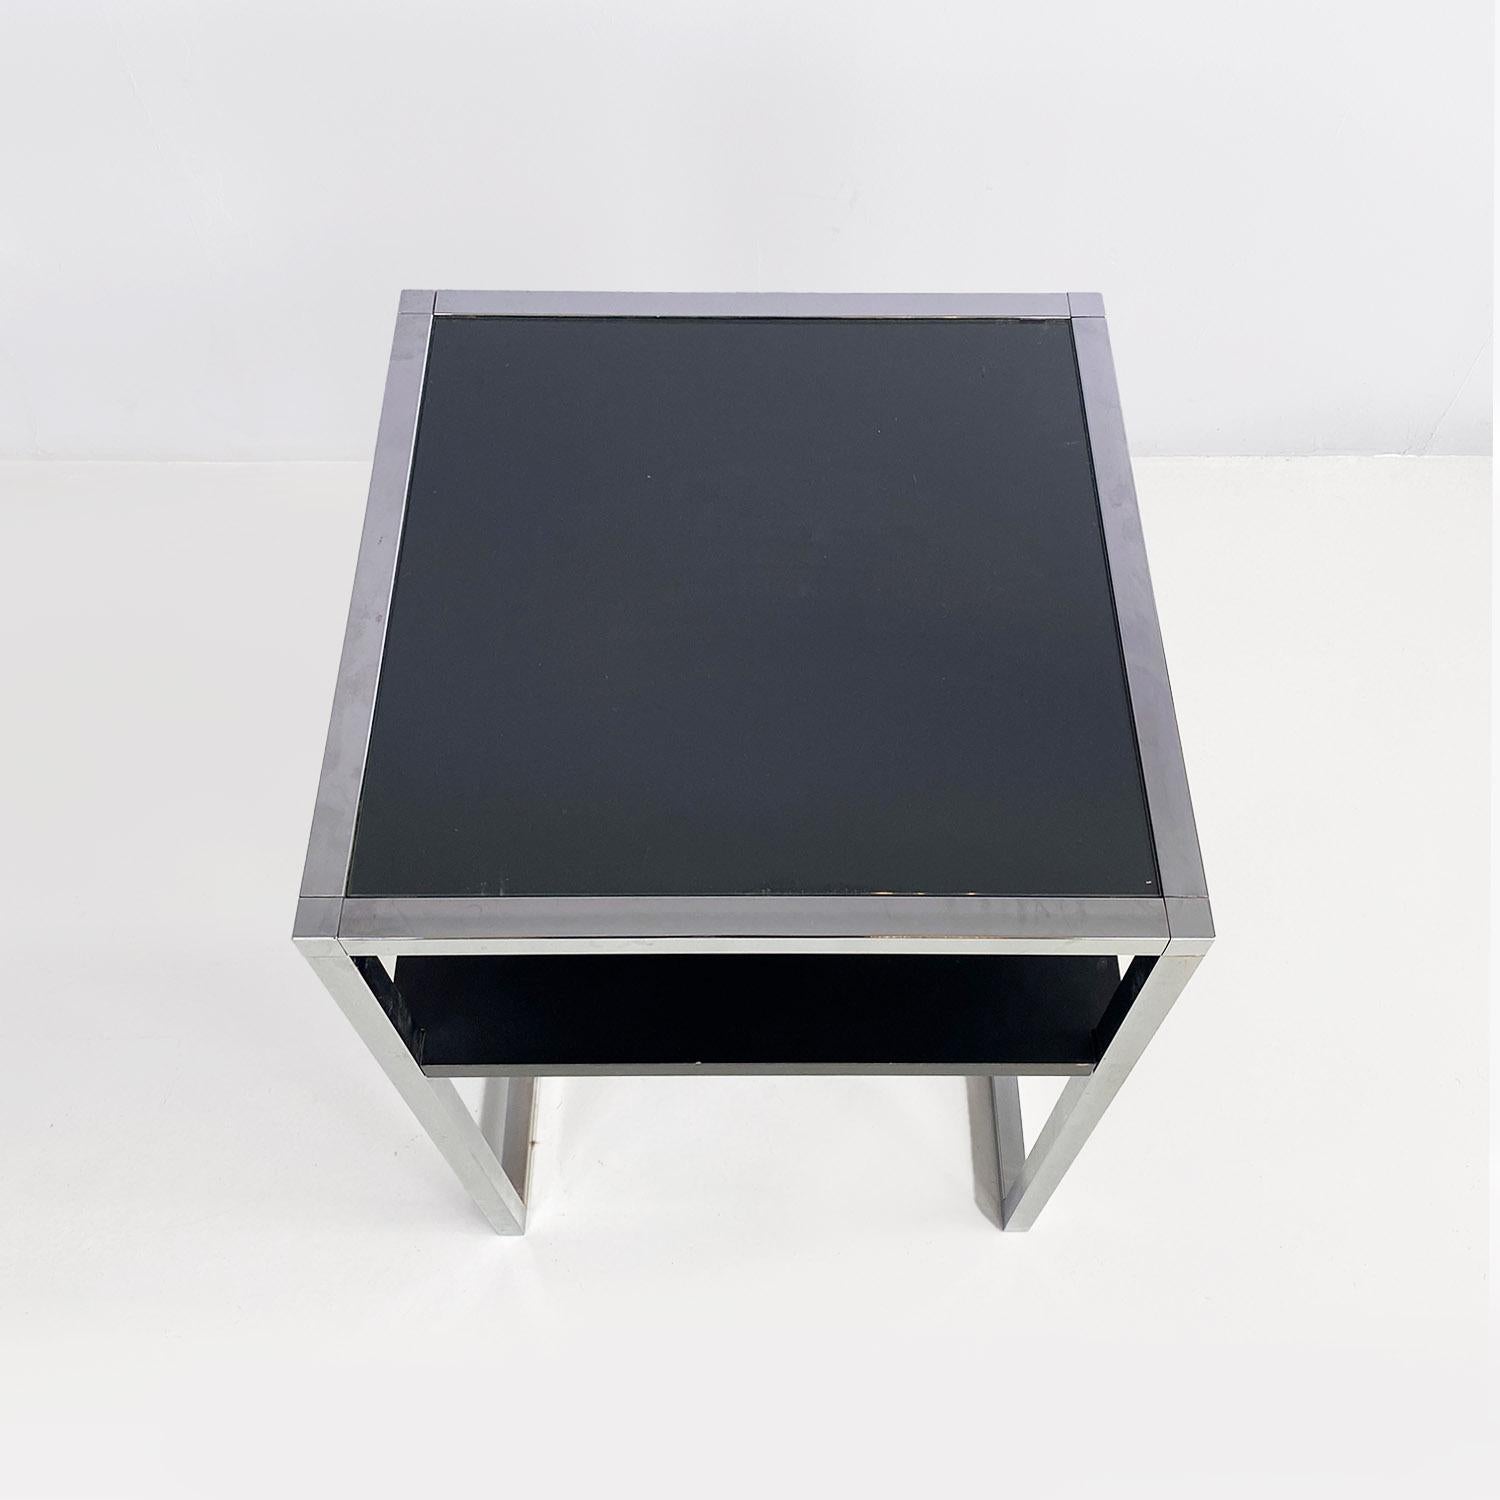 Italian modern chromed steel, wood and glass table for stereo and vinyls, 1990s For Sale 2